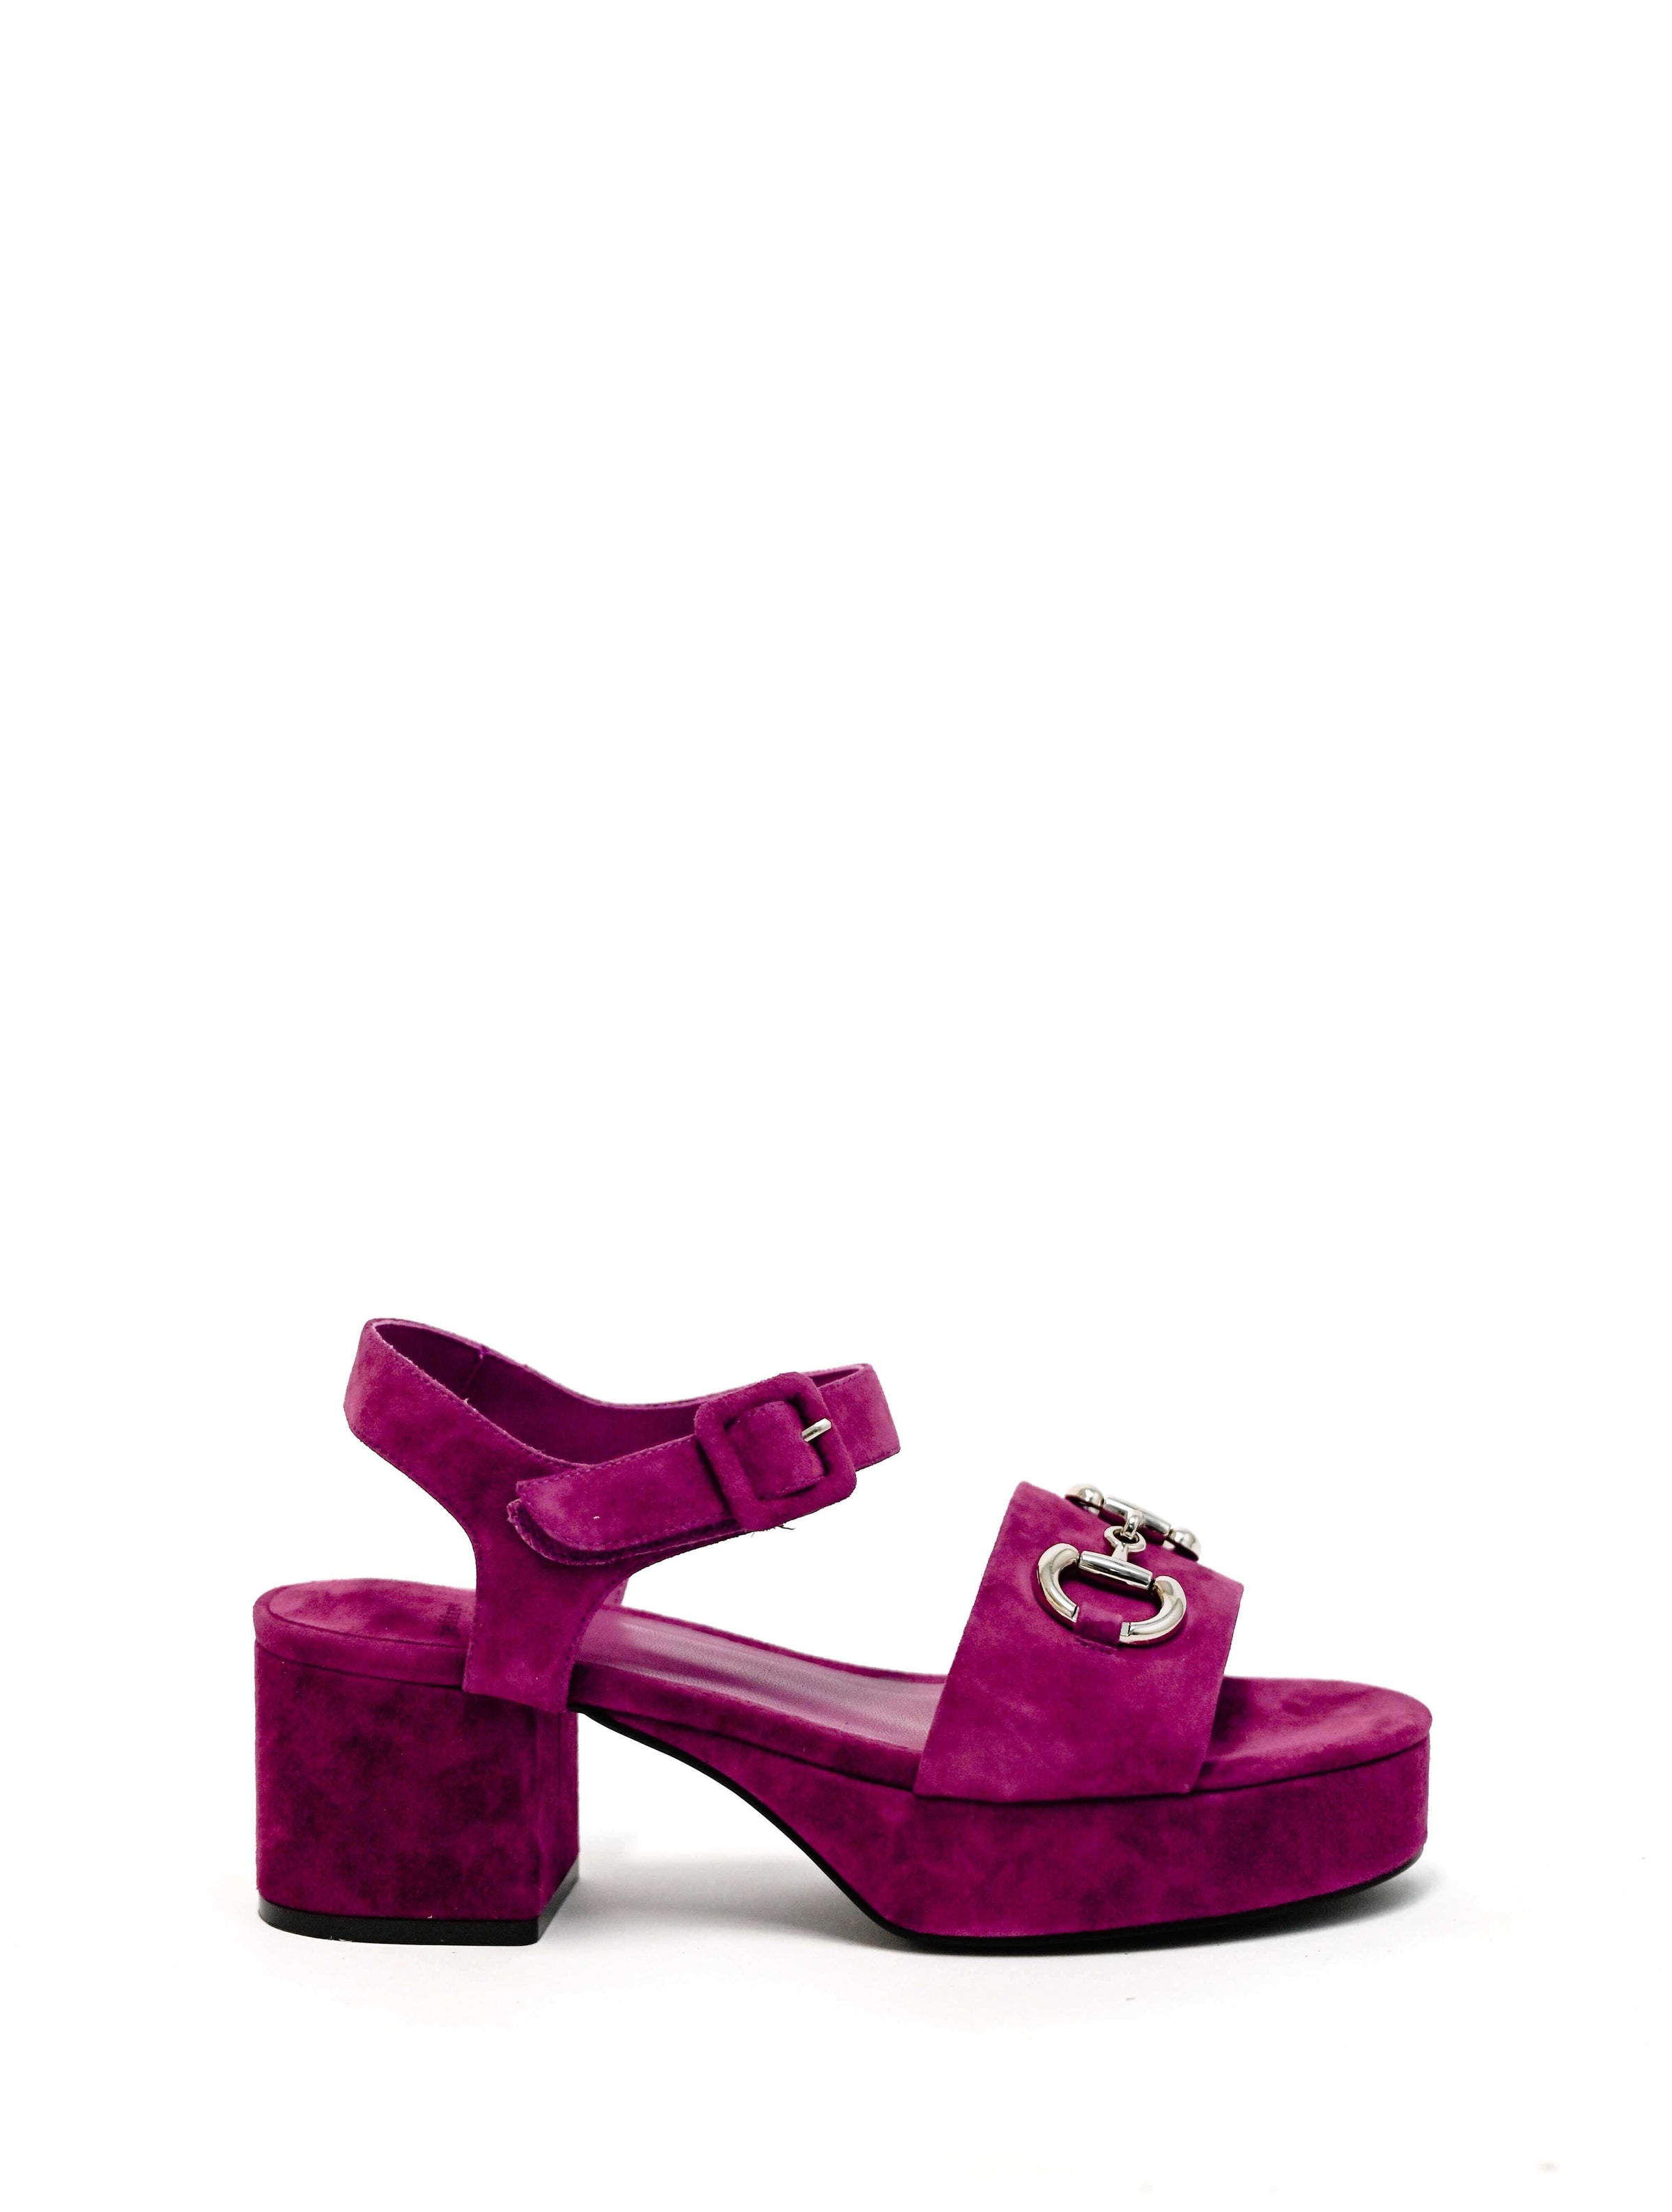 Jeffrey Campbell Timeless Sandal in Fuchsia Suede Silver